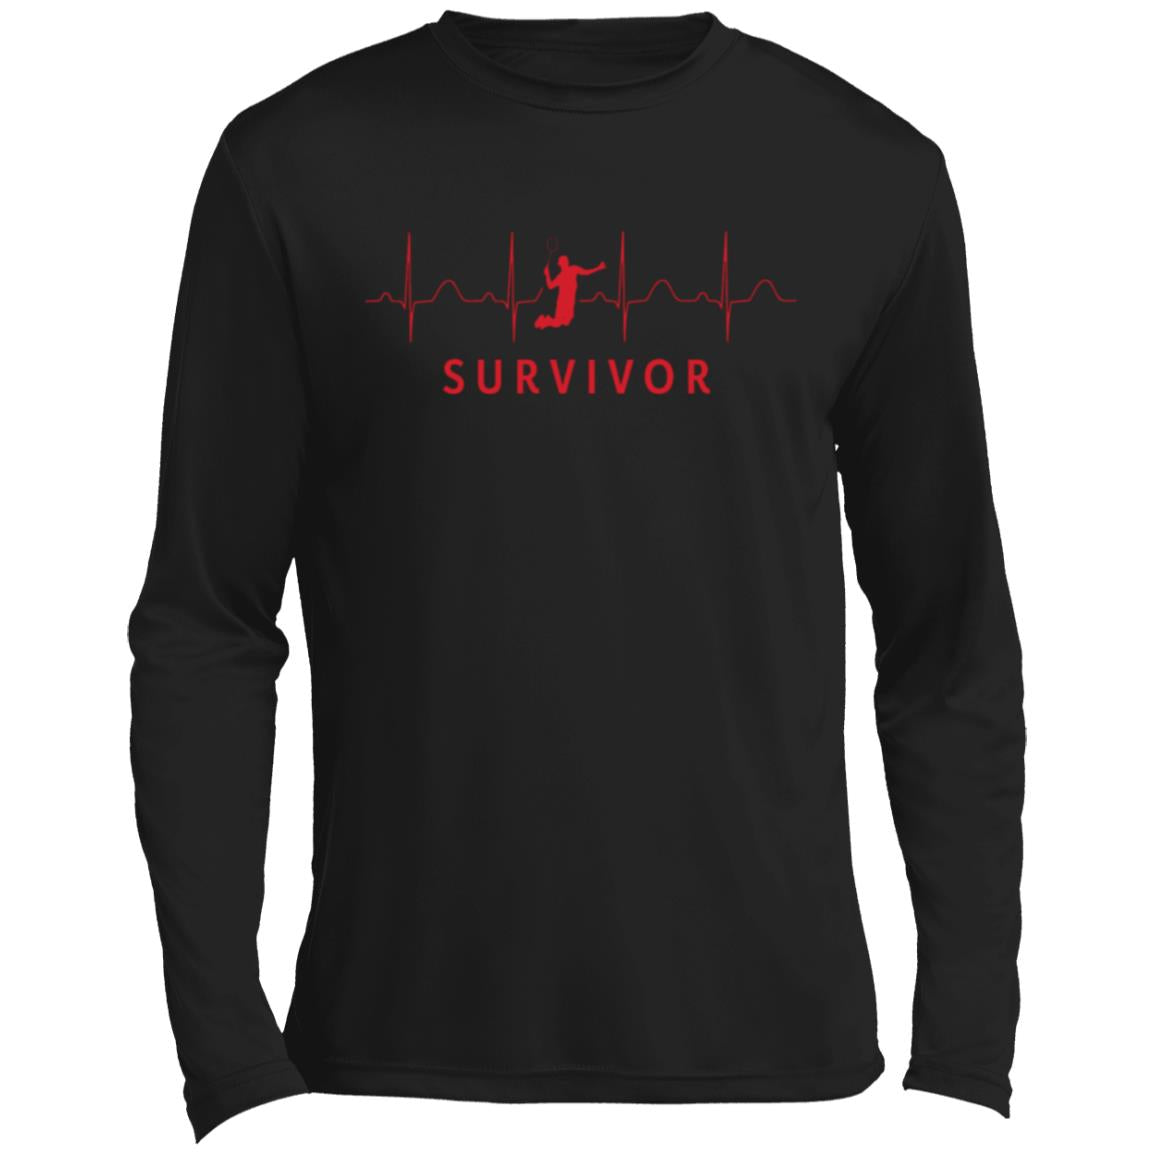 Black long-sleeve tee with "SURVIVOR" text along with a tennis player icon with EKG lines behind